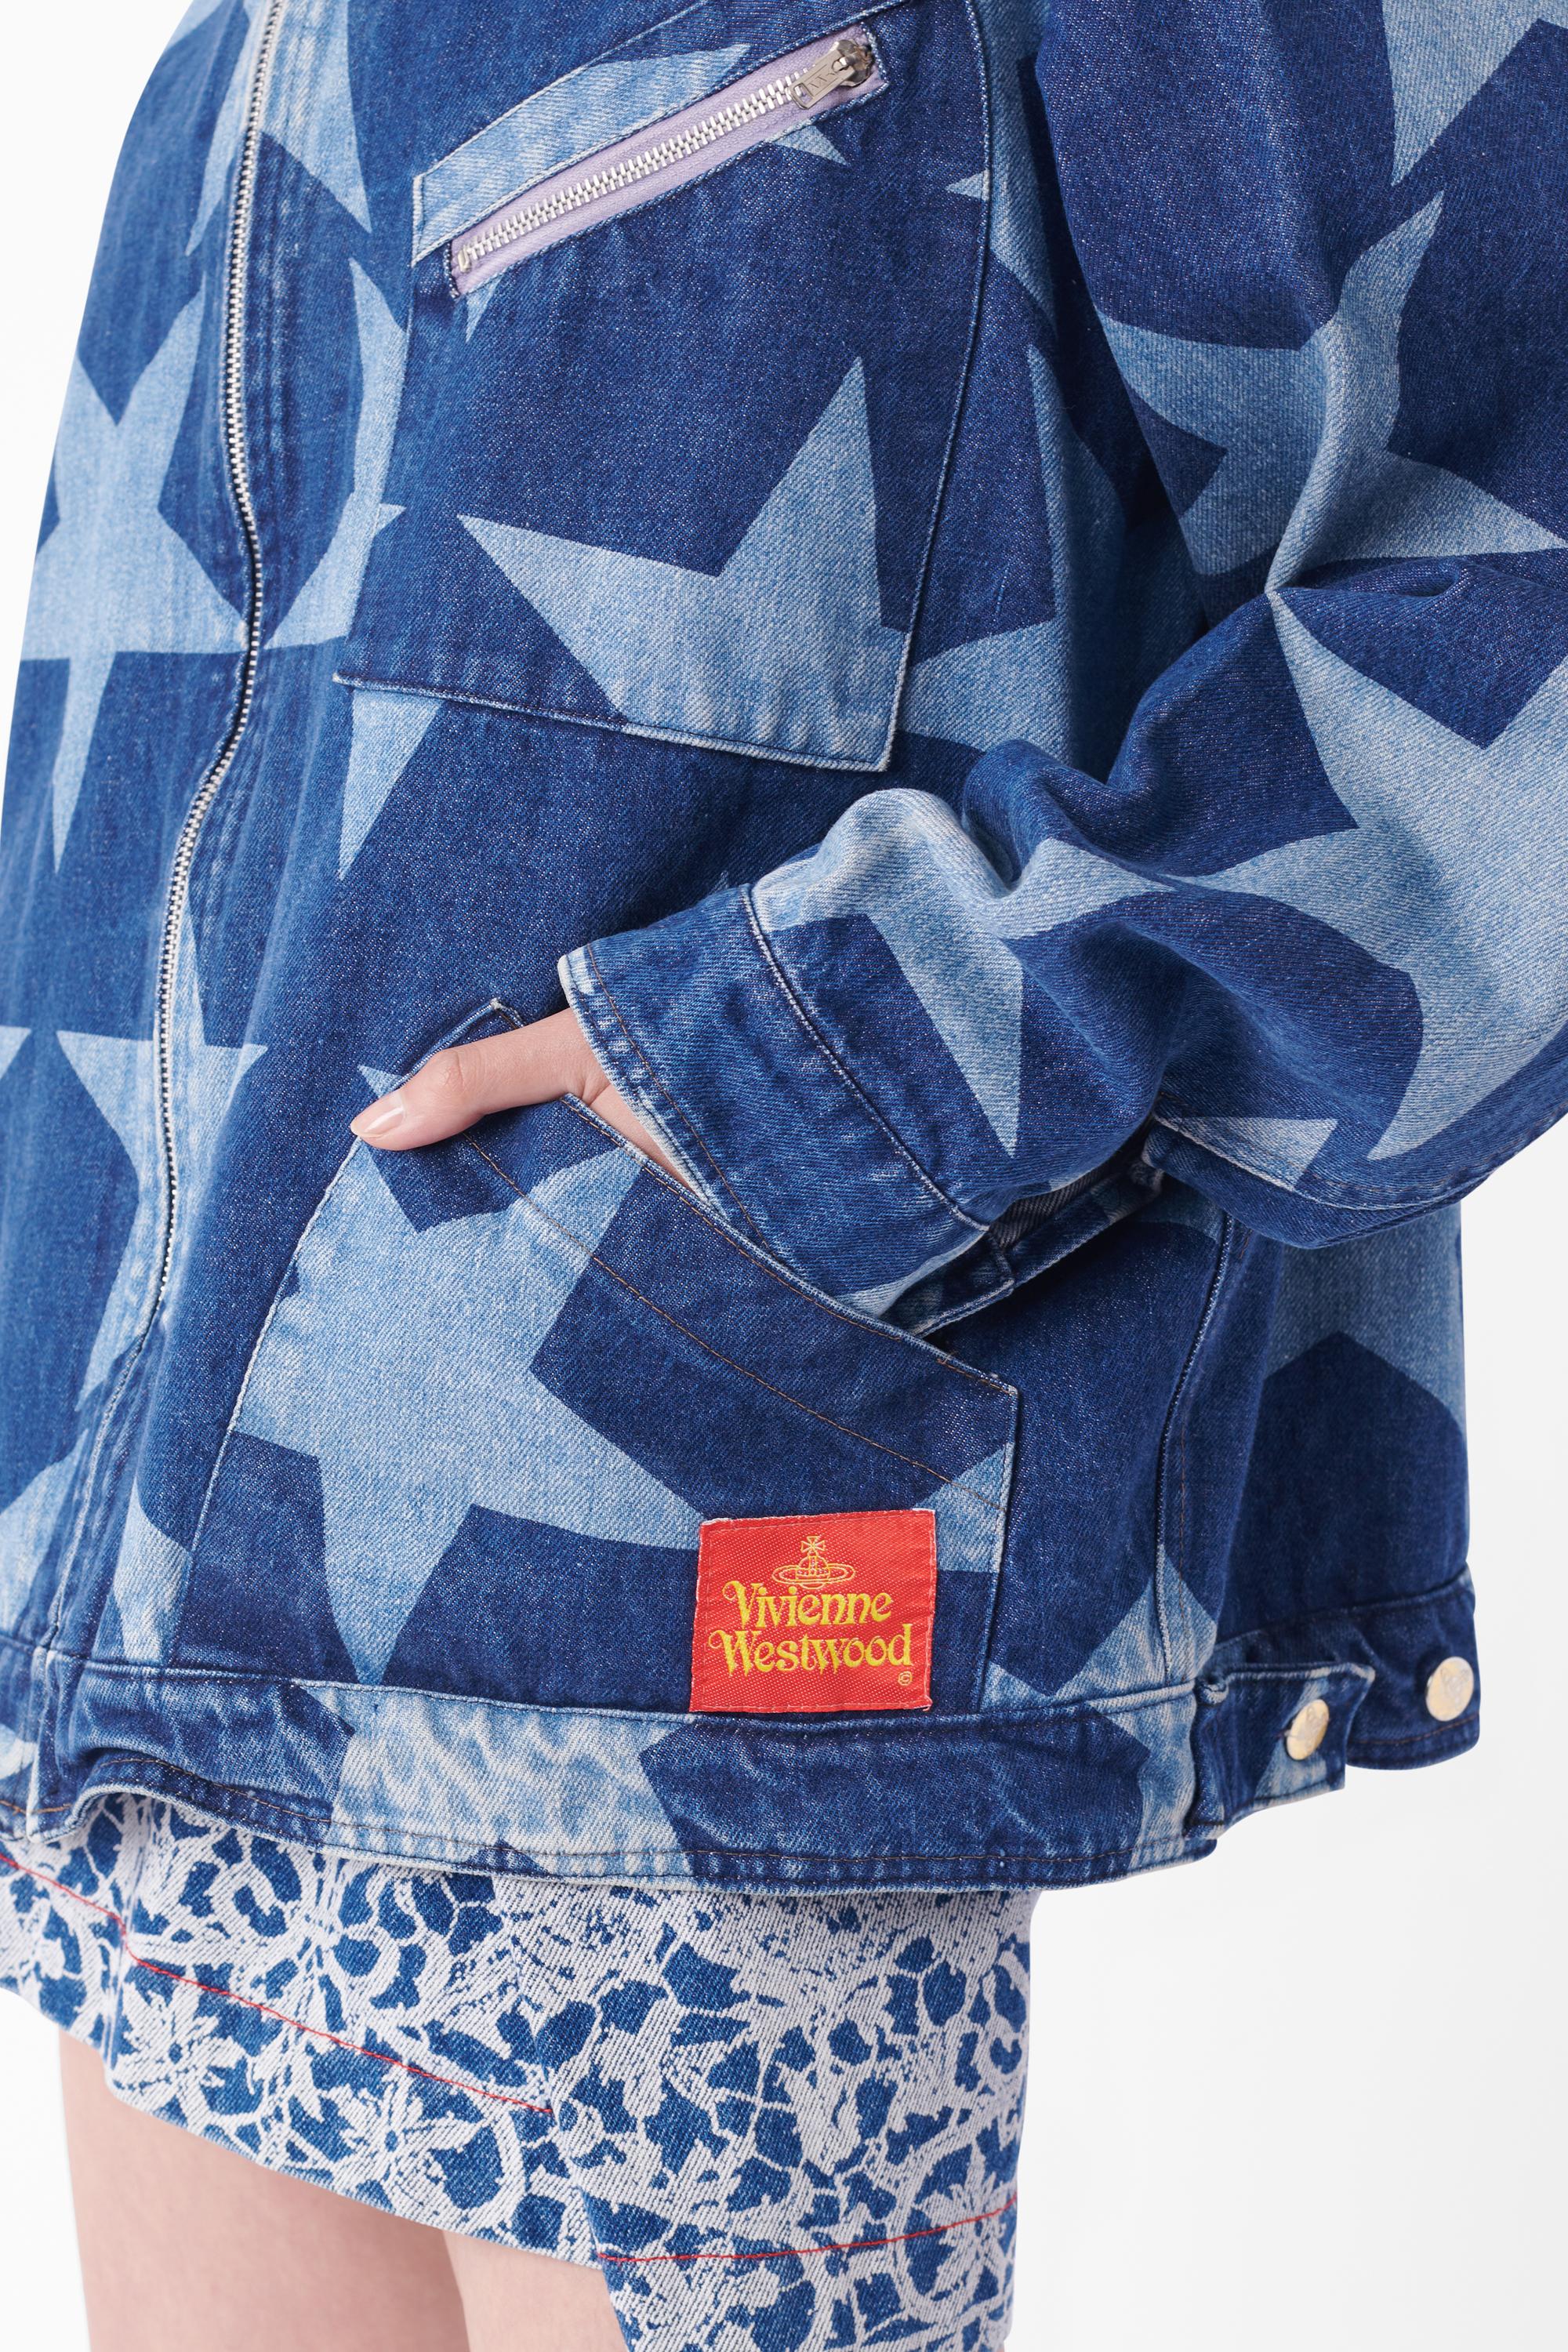 Vintage S/S 1985/86 Runway Mini Crini Star Denim Jacket In Excellent Condition For Sale In London, GB